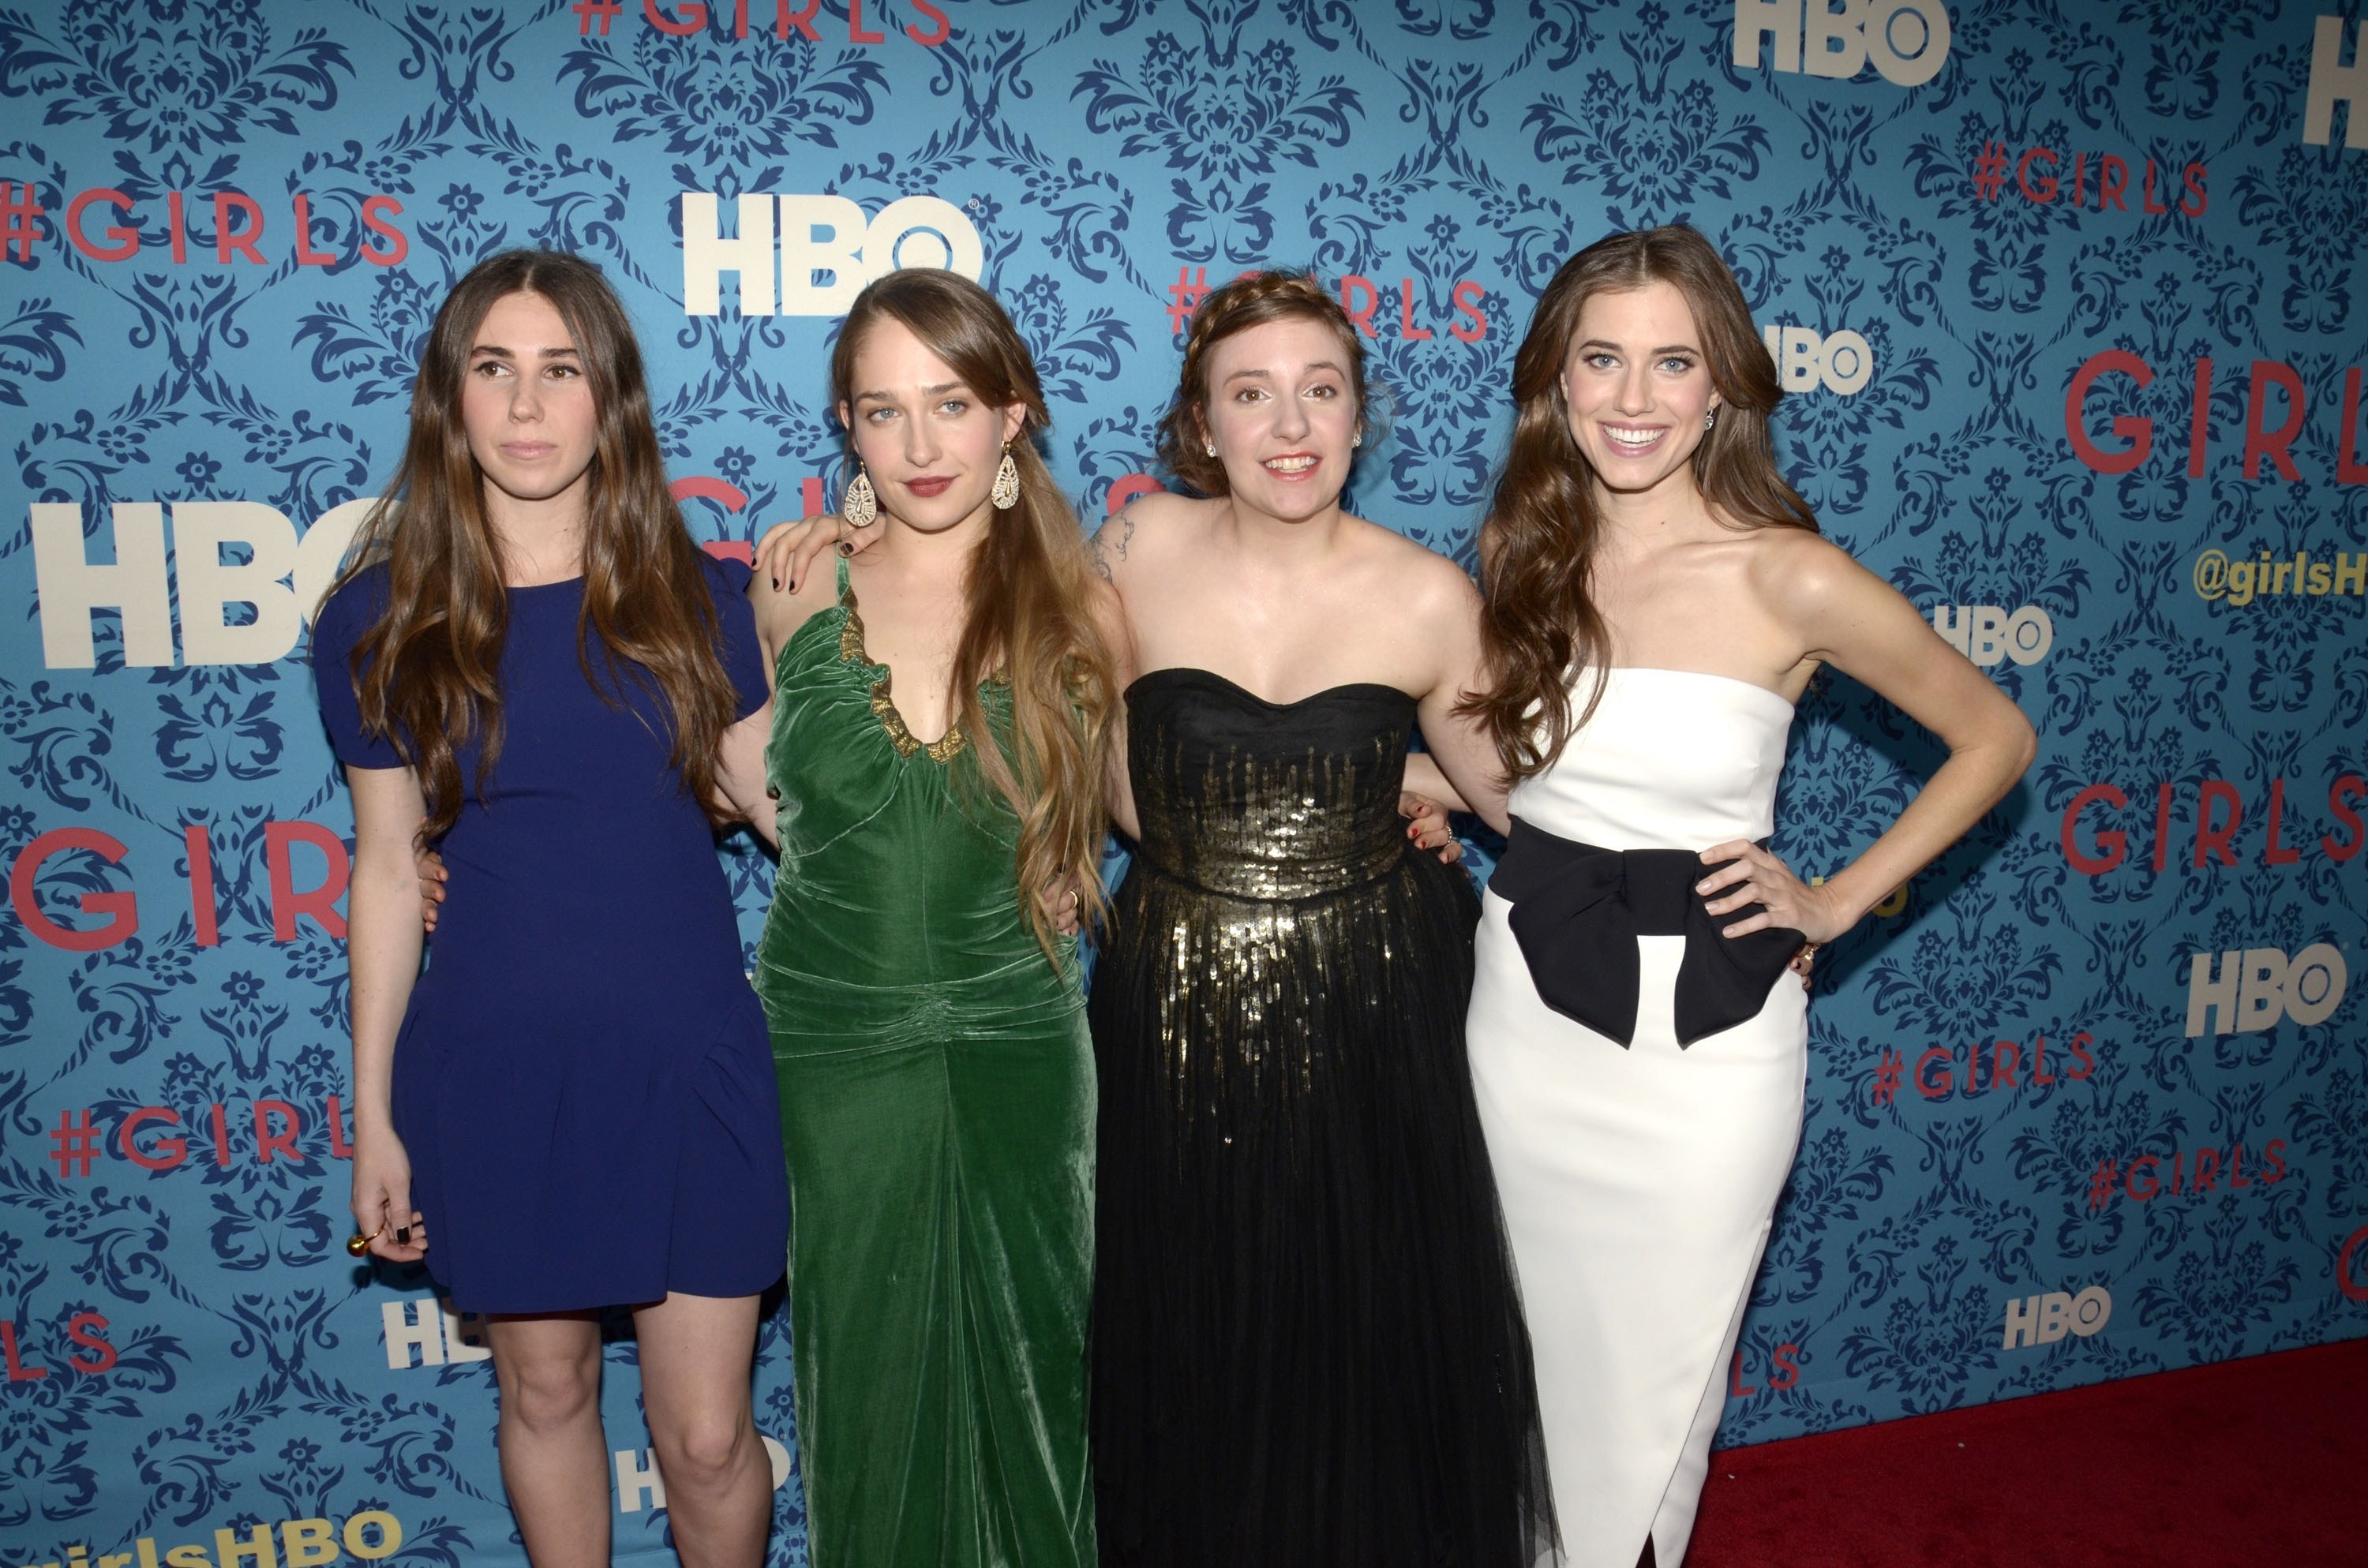 The cast of Girls at an event